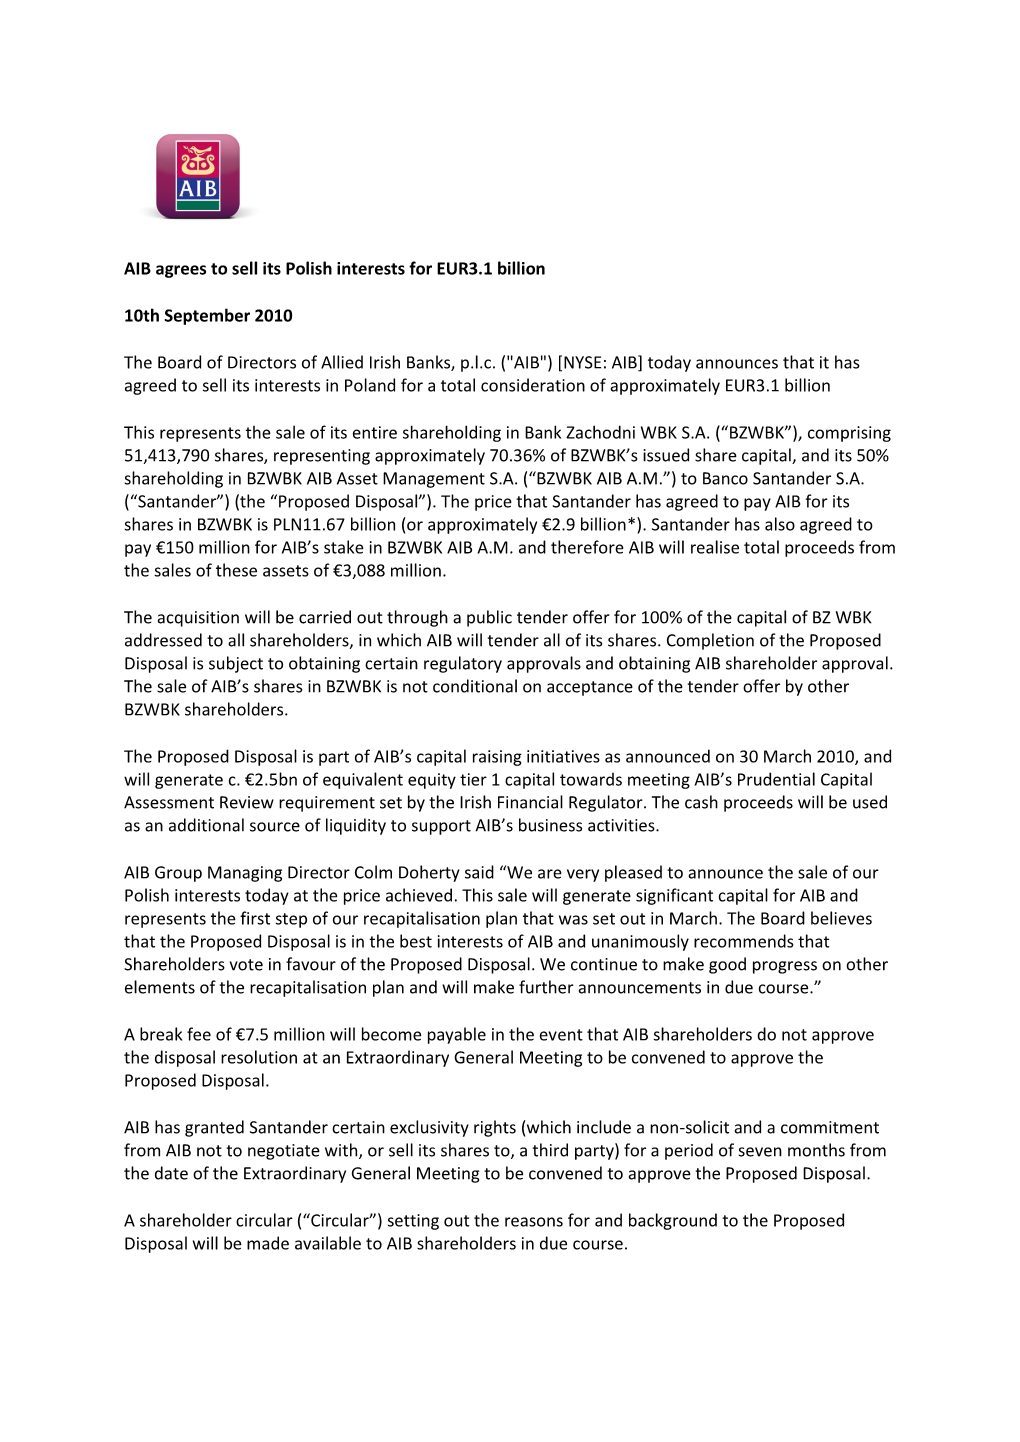 AIB Agrees to Sell Its Polish Interests for EUR3.1 Billion 10Th September 2010 the Board of Directors of Allied Irish Banks